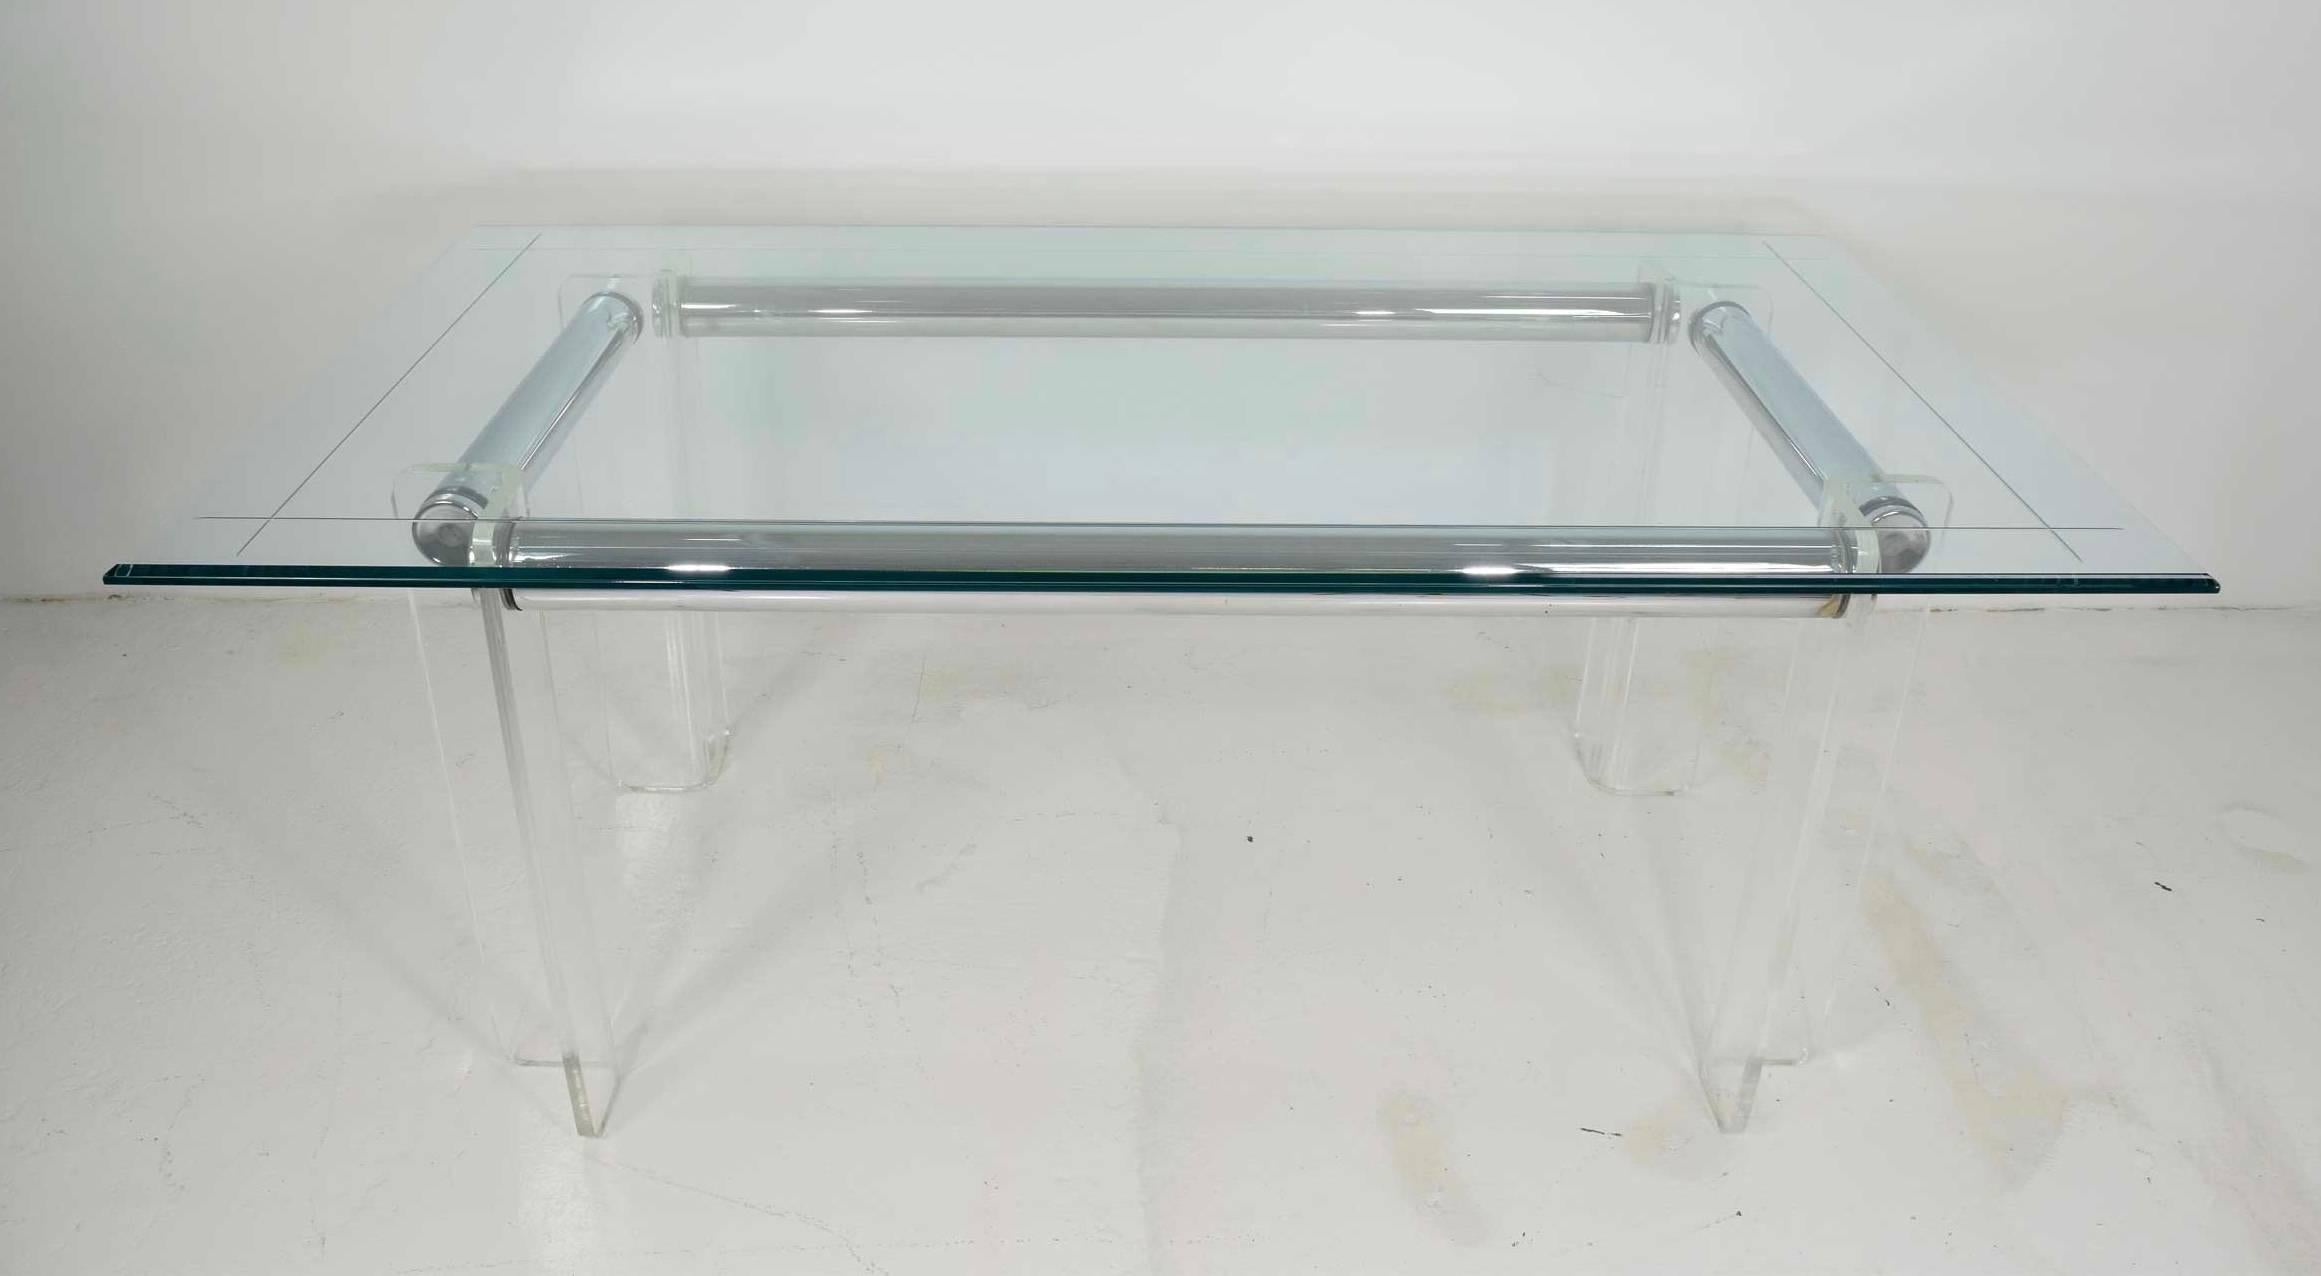 Chrome rods and Lucite legs. The table can accommodate different glass sizes. The measurements we have listed are for the base only and the price is for the base only. We can supply glass as requested. Glass size shown is 72" x 40".